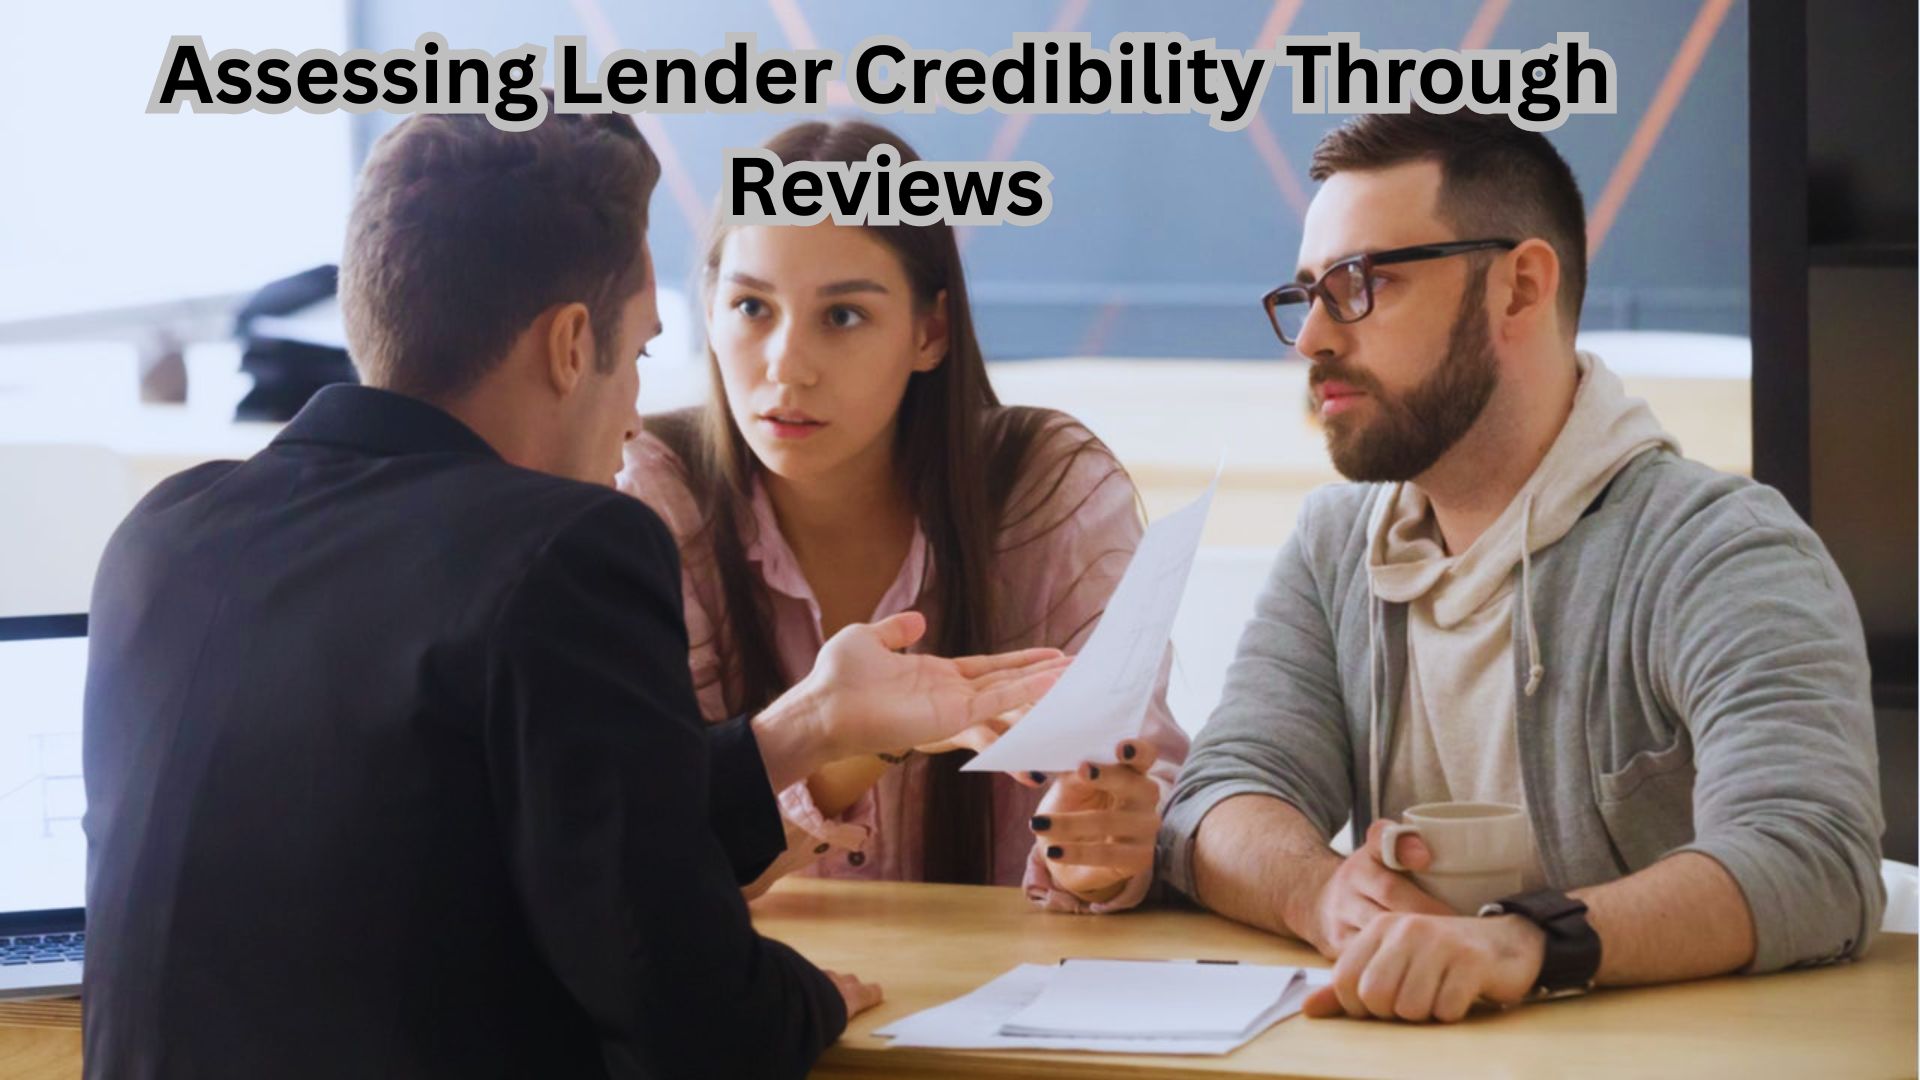 Informed Choices Assessing Lender Credibility Through Reviews.